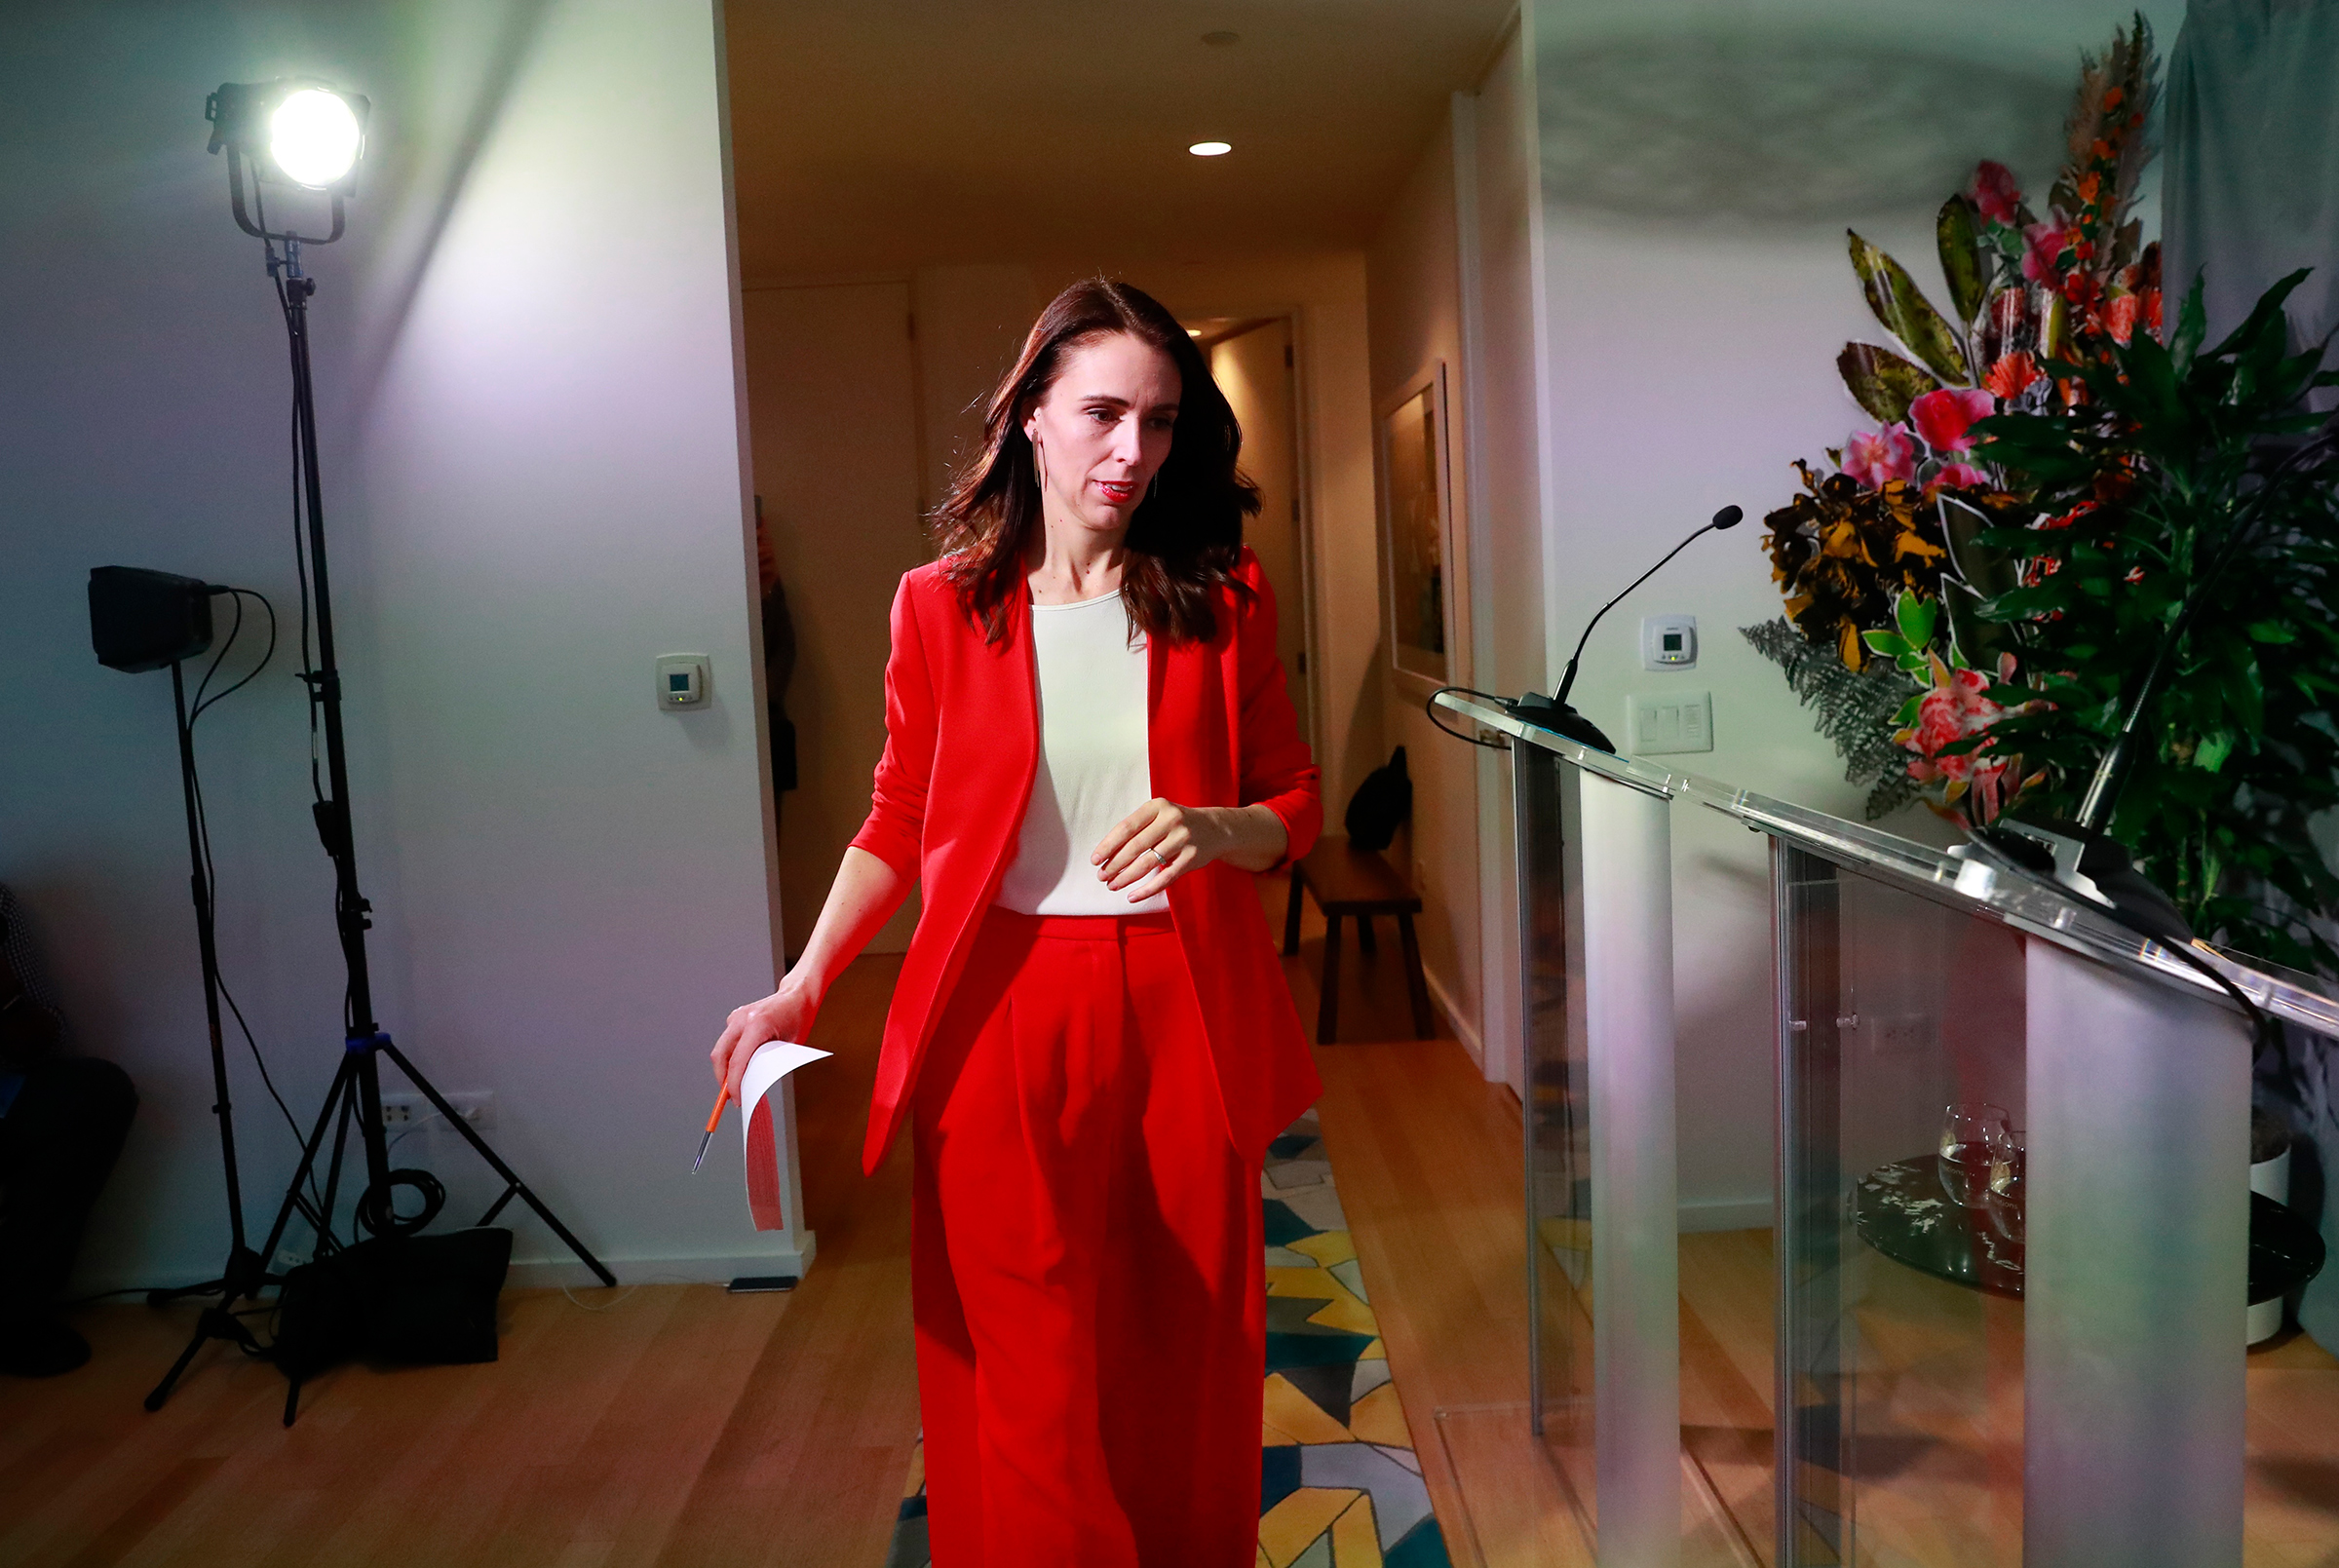 New Zealand's Prime Minister Jacinda Ardern arrives to hold a news conference during the 2019 United Nations Climate Action Summit in New York City, Sept. 23, 2019. (Yana Paskova—Reuters)